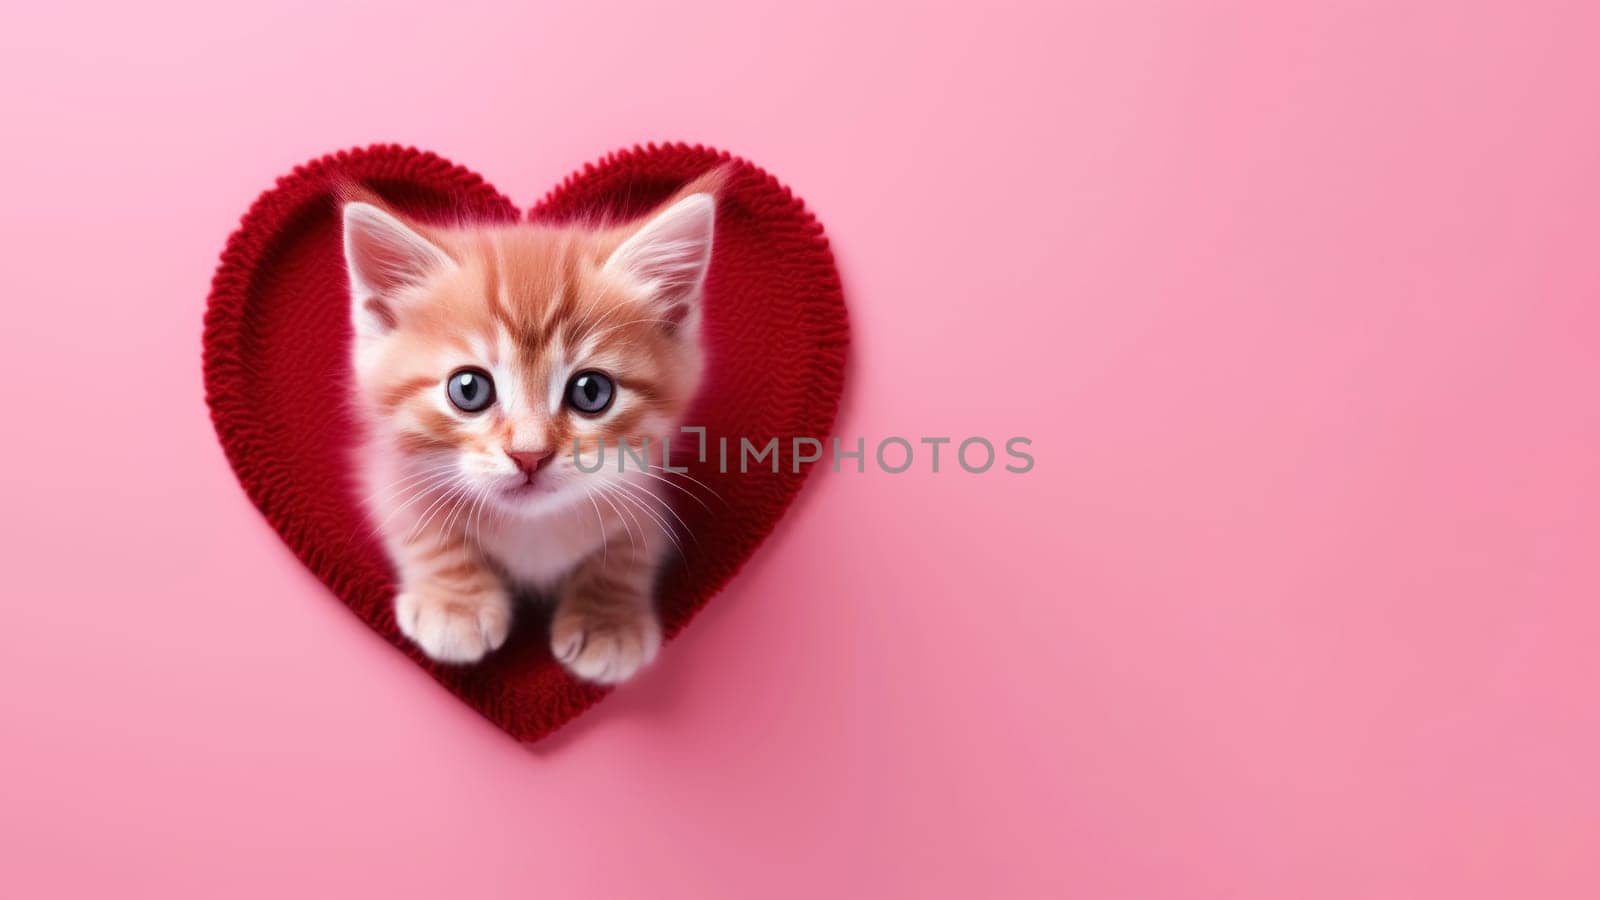 A cute and attractive kitten surrounded by a red heart on a pink background by andreyz